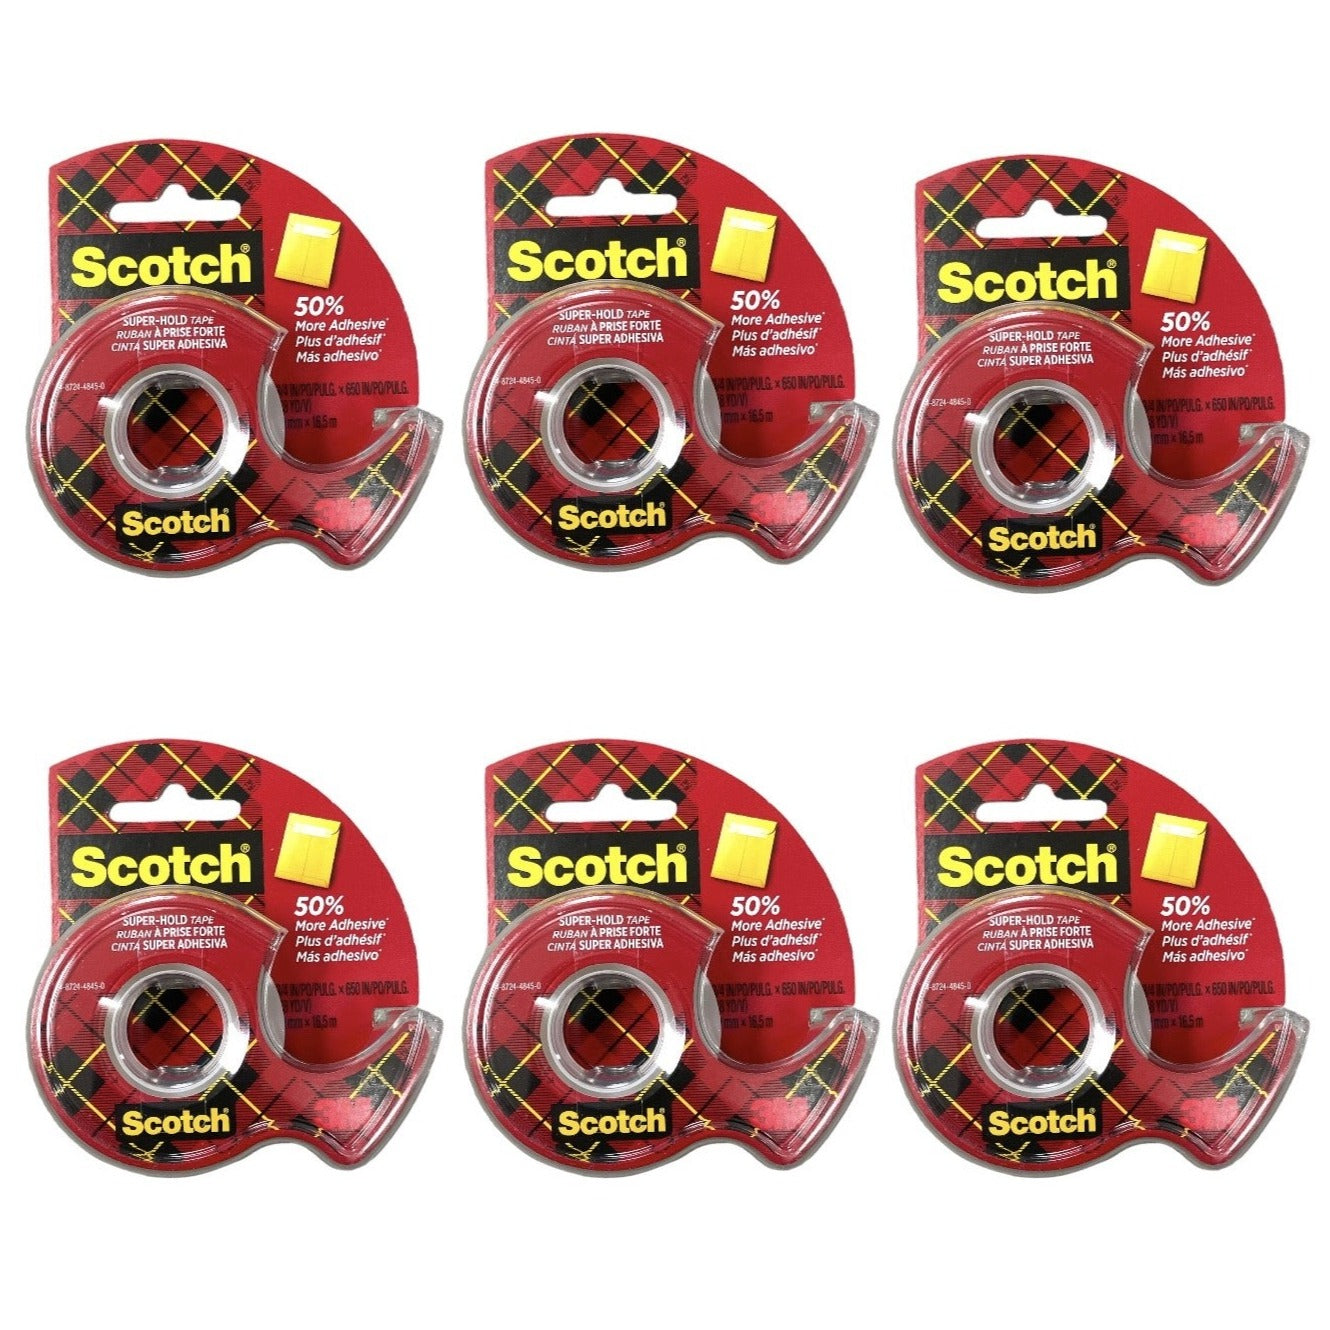 Scotch 3M Super Hold Clear Tape Dispenser 0.75 In X 650 In (18 Yards) - Pack Of 6 Holidays gigt wrapping crafts